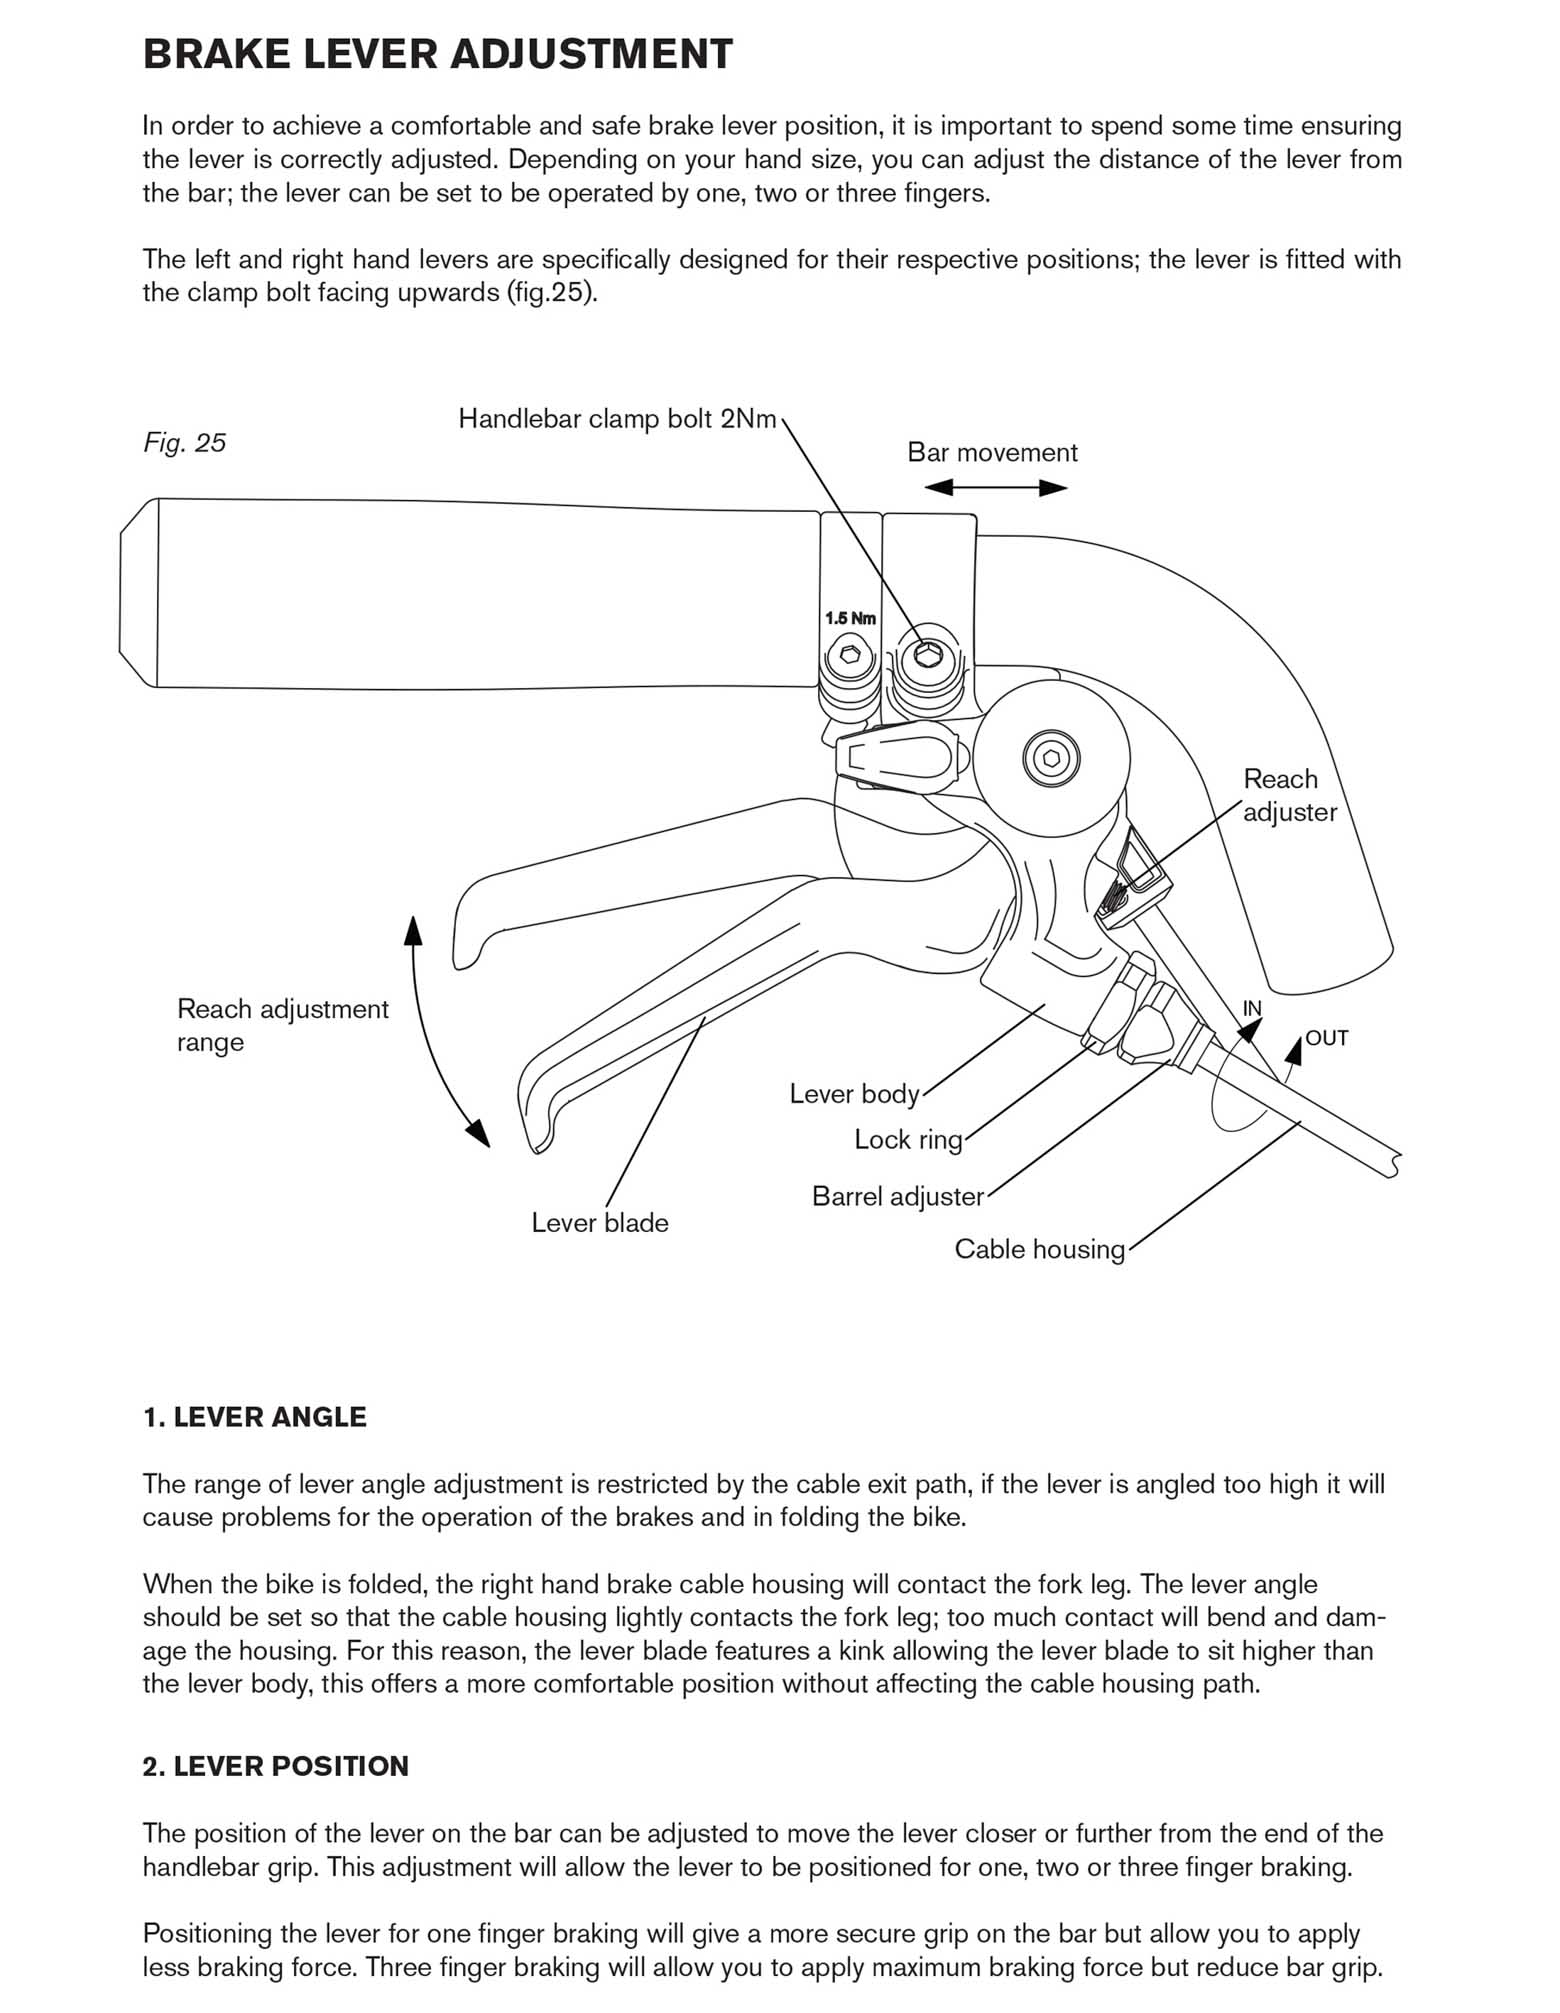 Brompton - Owners Manual 2017 page 28 main image